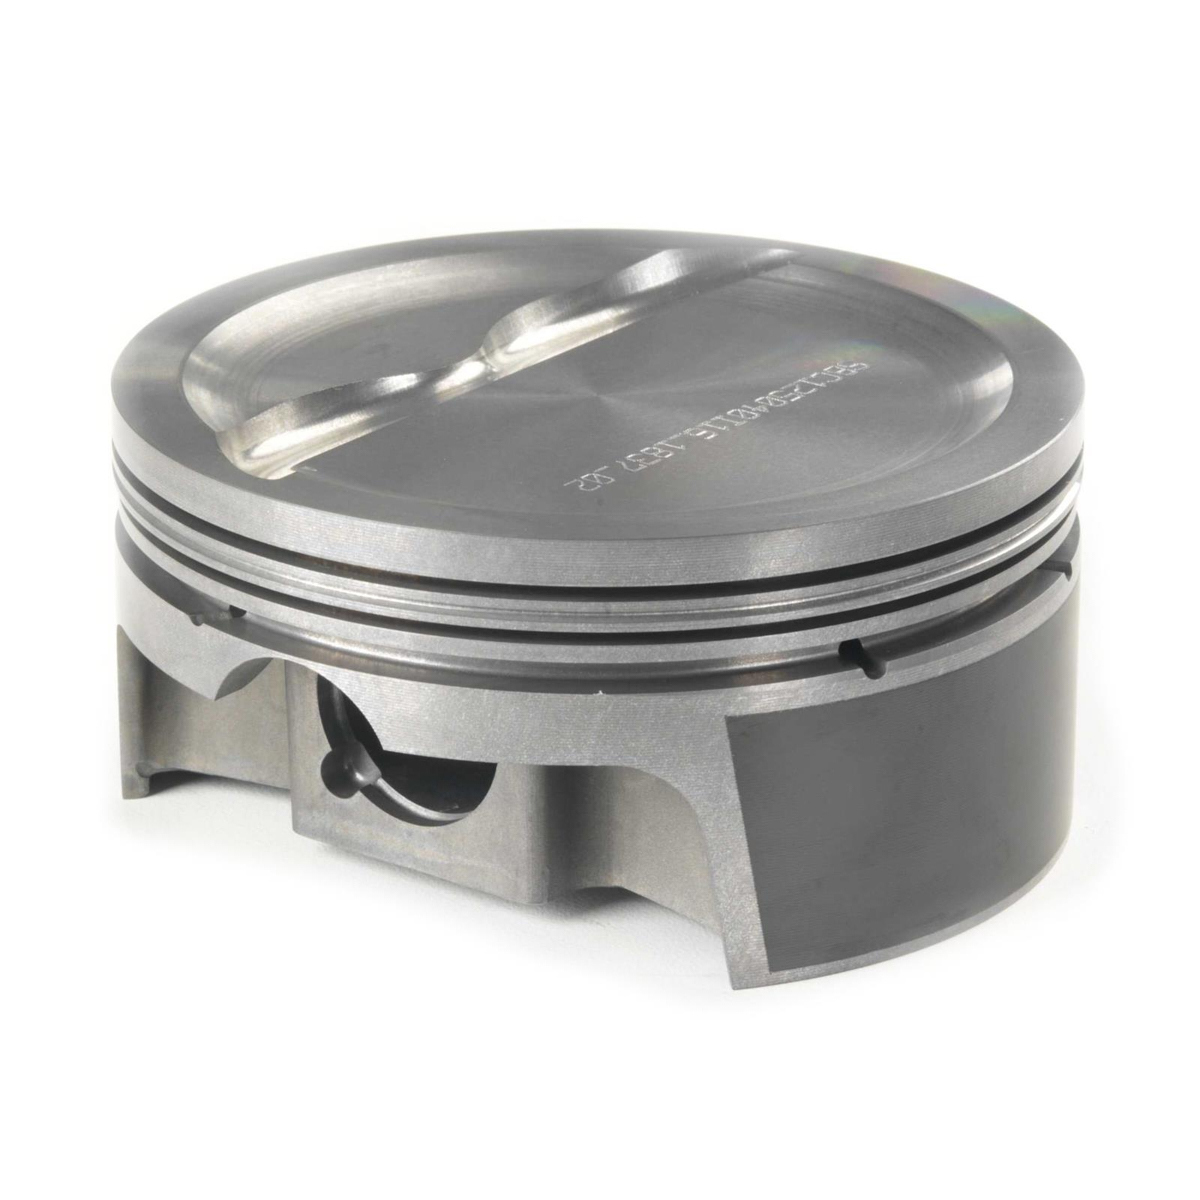 Mahle Pistons 930211425 Pistons and Rings, PowerPak, Forged, 4.125 in Bore, 1.0 x 1.0 x 2.0 mm Ring Groove, Minus 20.00 cc, Small Block Chevy, Kit